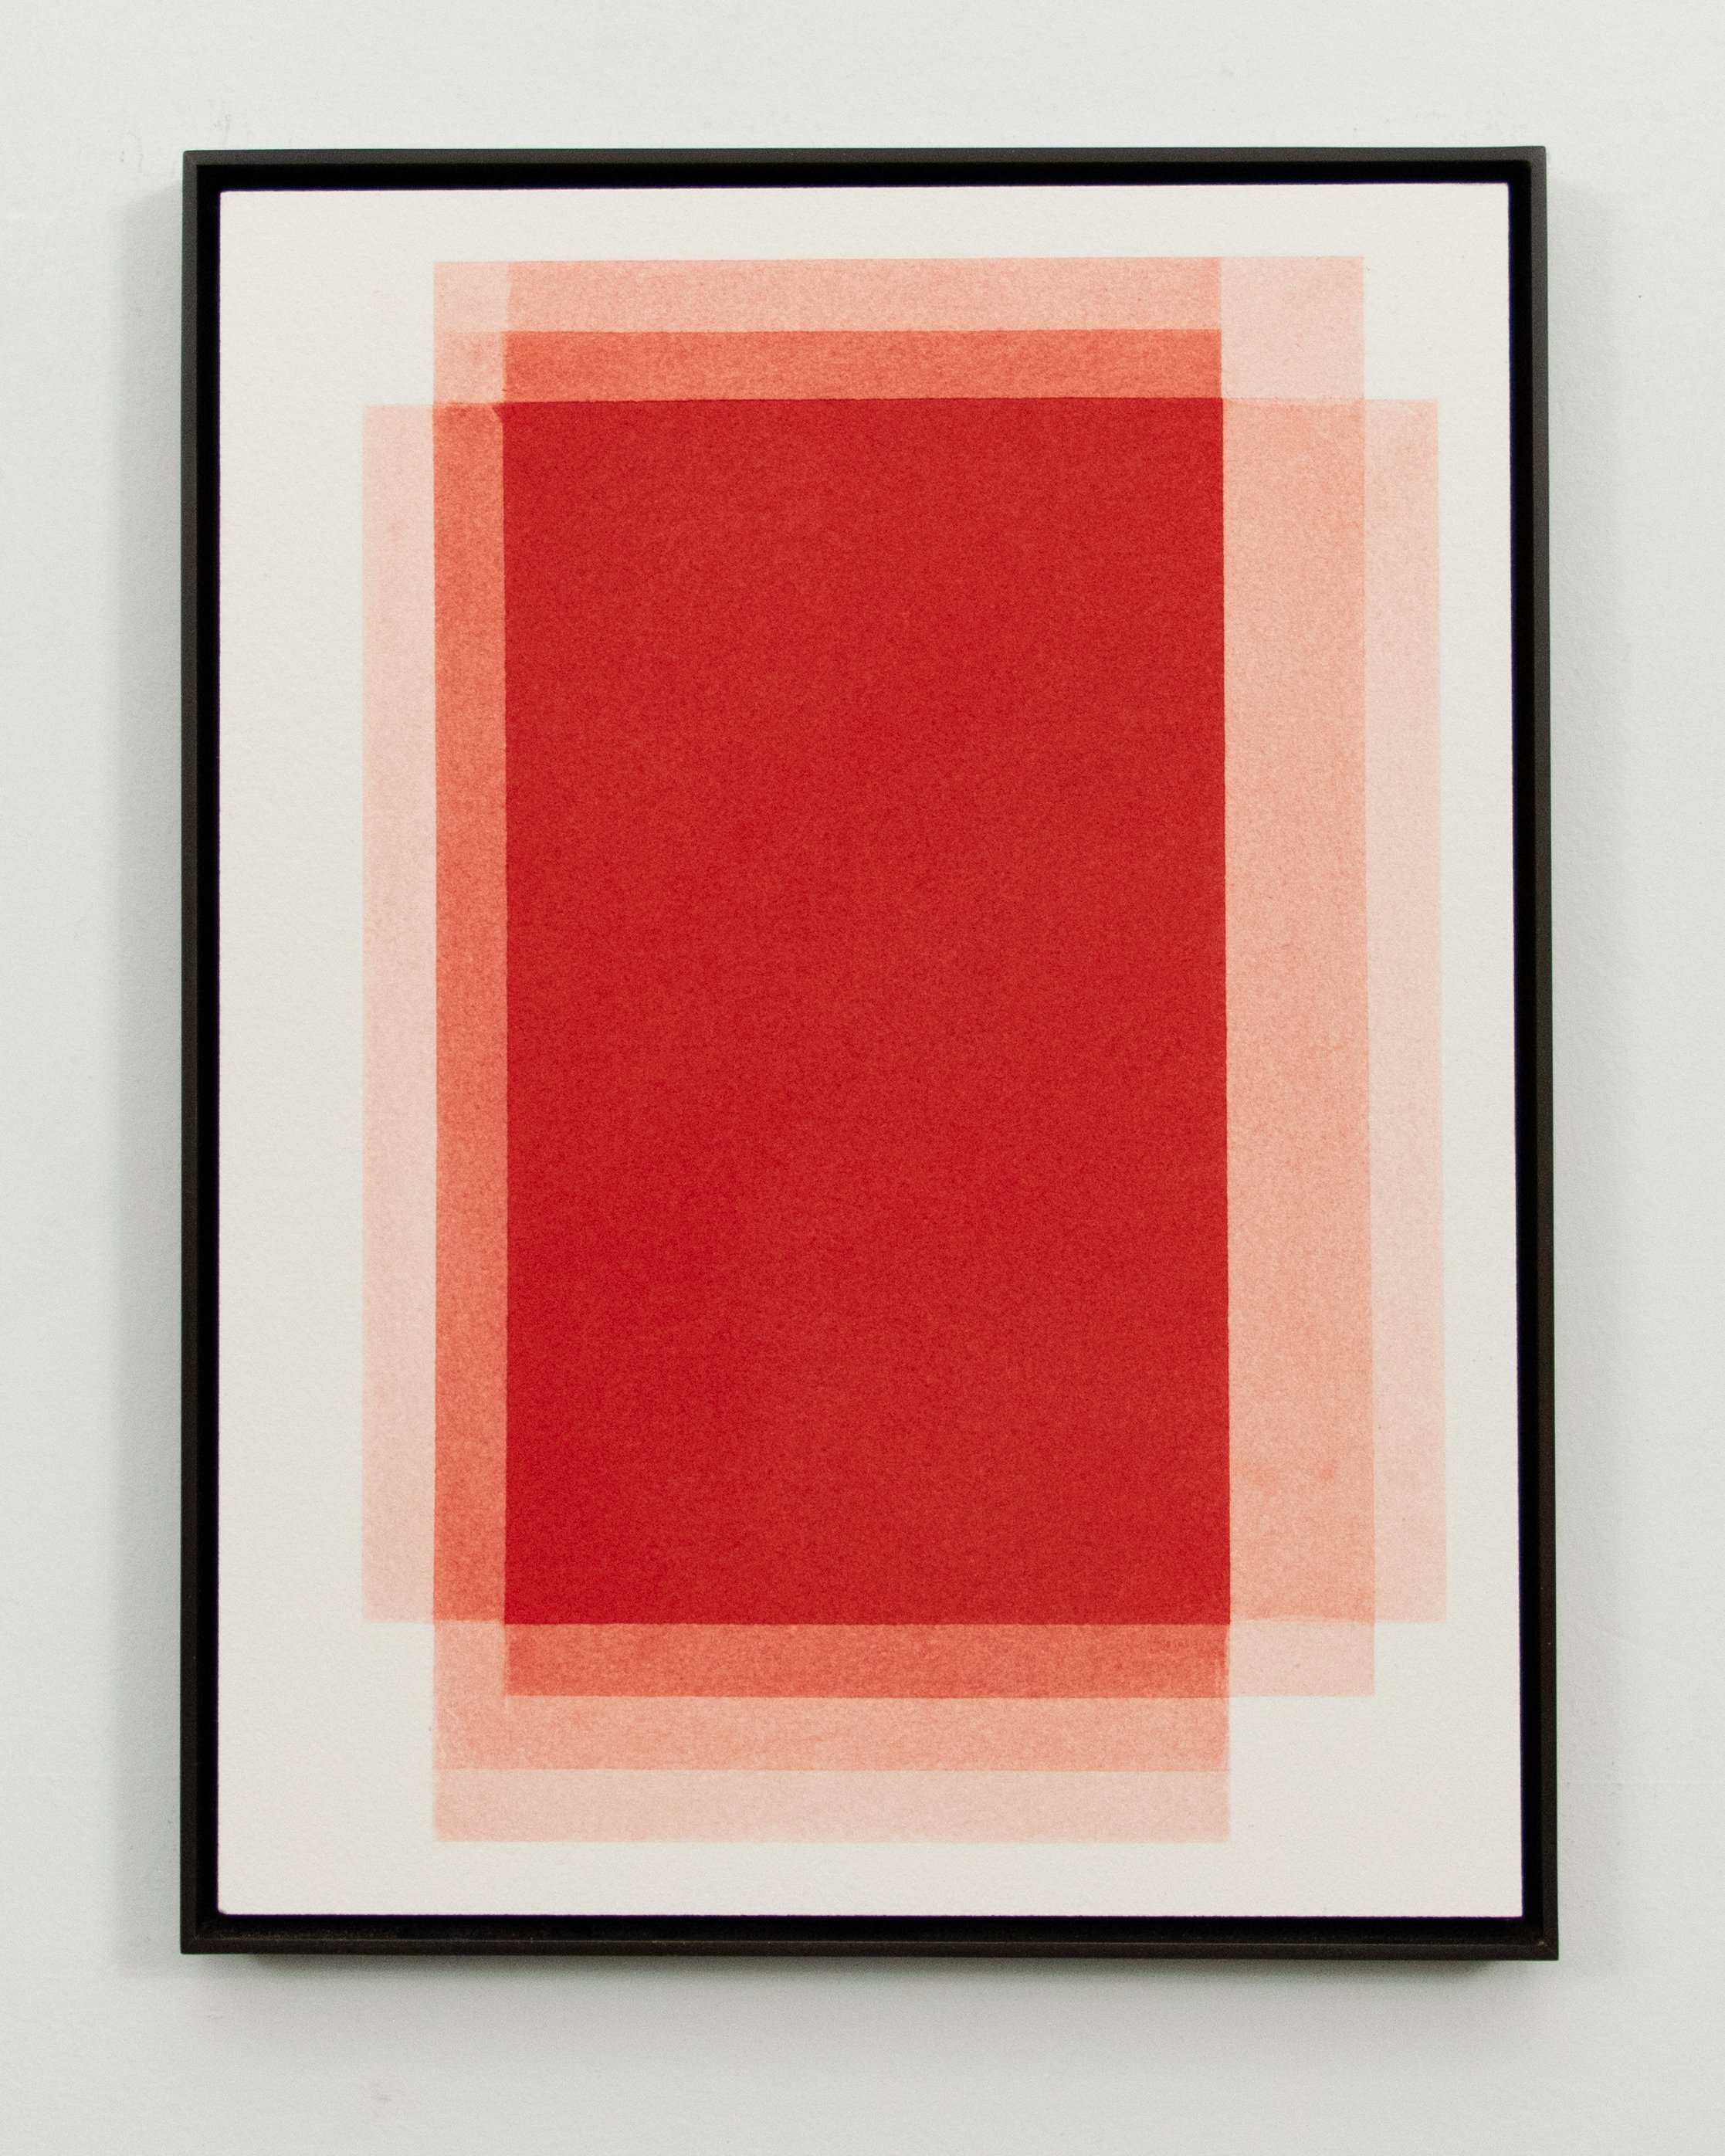  Stephen Somple  11 18 6 1 Red , 2022 Graphite and pigment on paper with oxidized brass frame 9.5" x 12.5" x .5" 